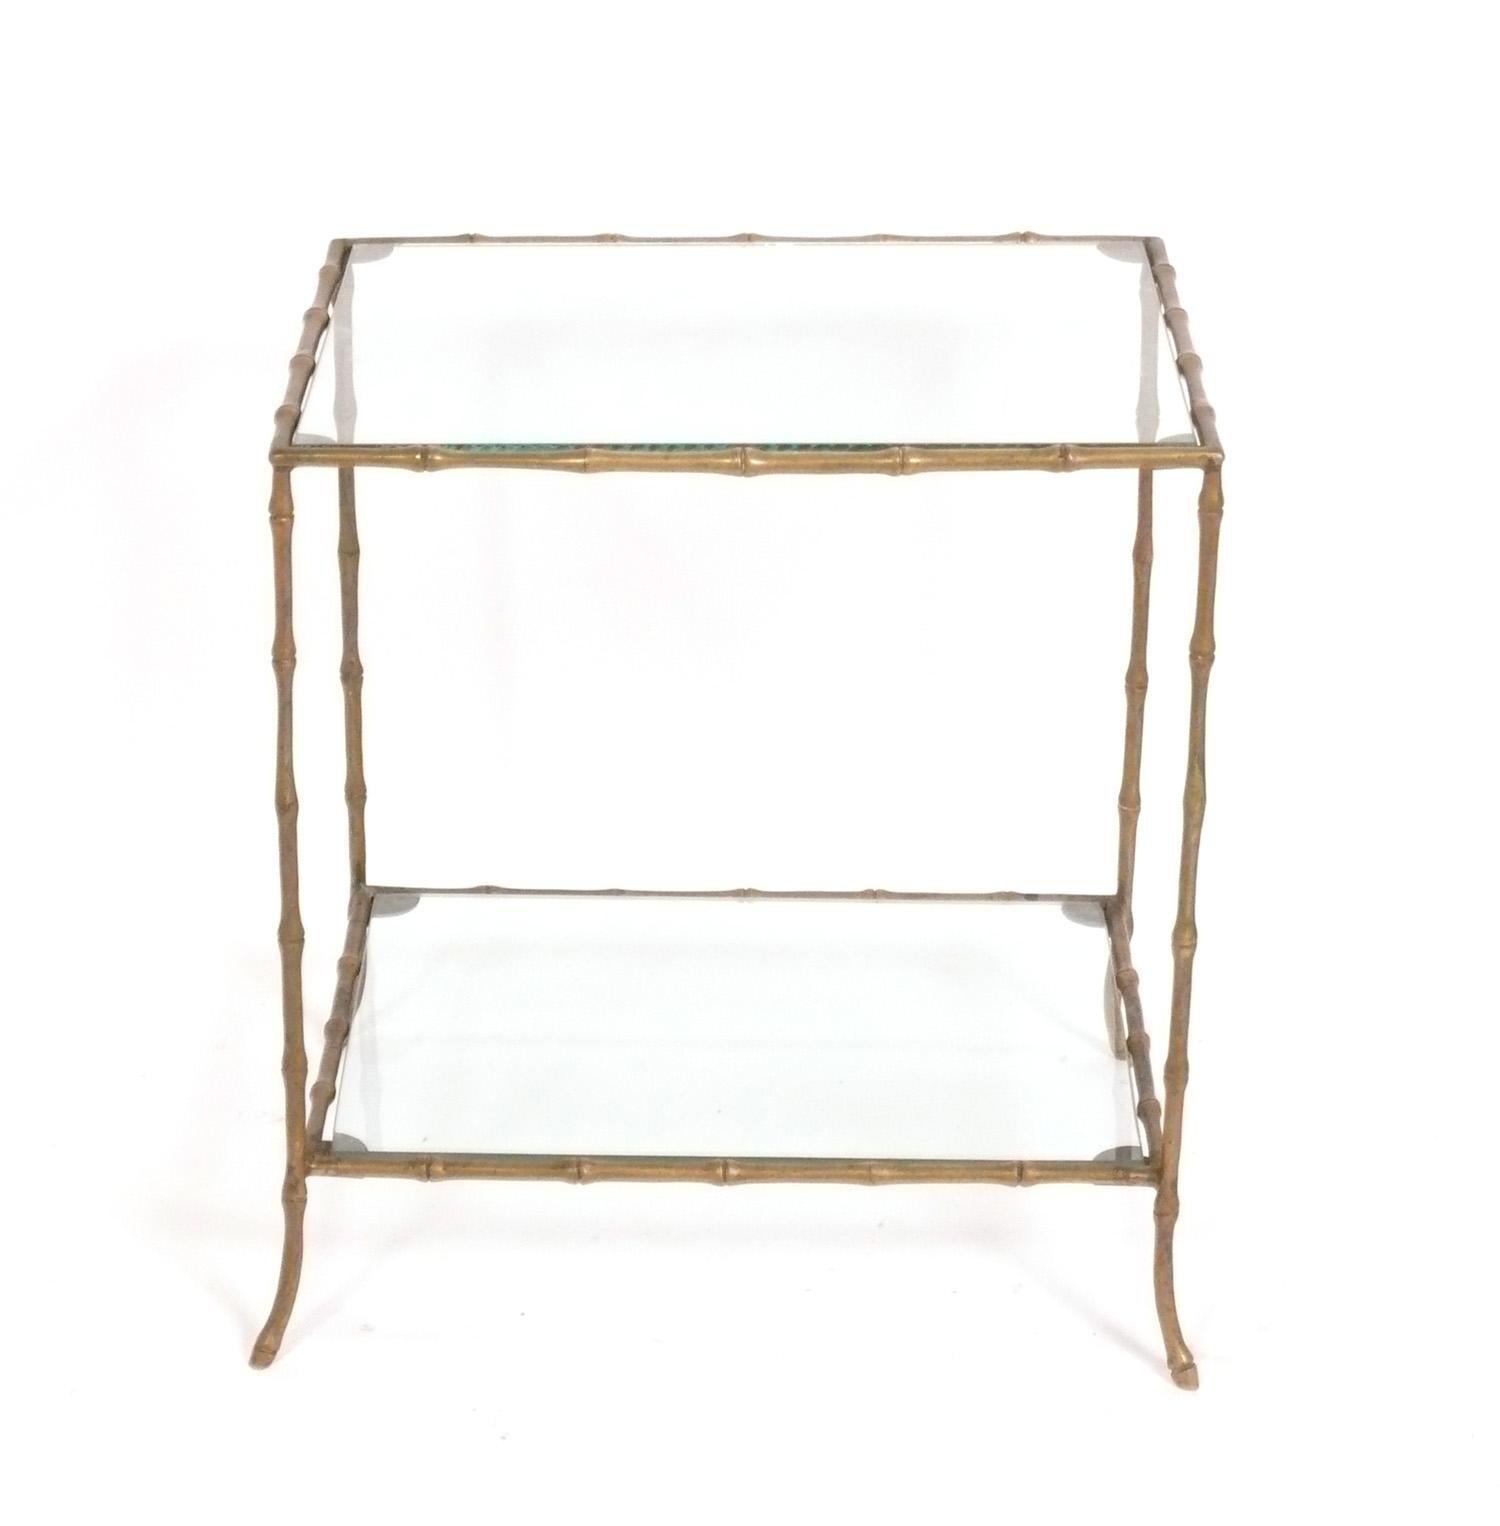 Elegant Brass Faux Bamboo Table, attributed to Maison Bagues, French, circa 1960s. Brass retains warm original patina. This table is a versatile size, and can be used as a side or end table, or dry bar in a living area, or as a nightstand in a